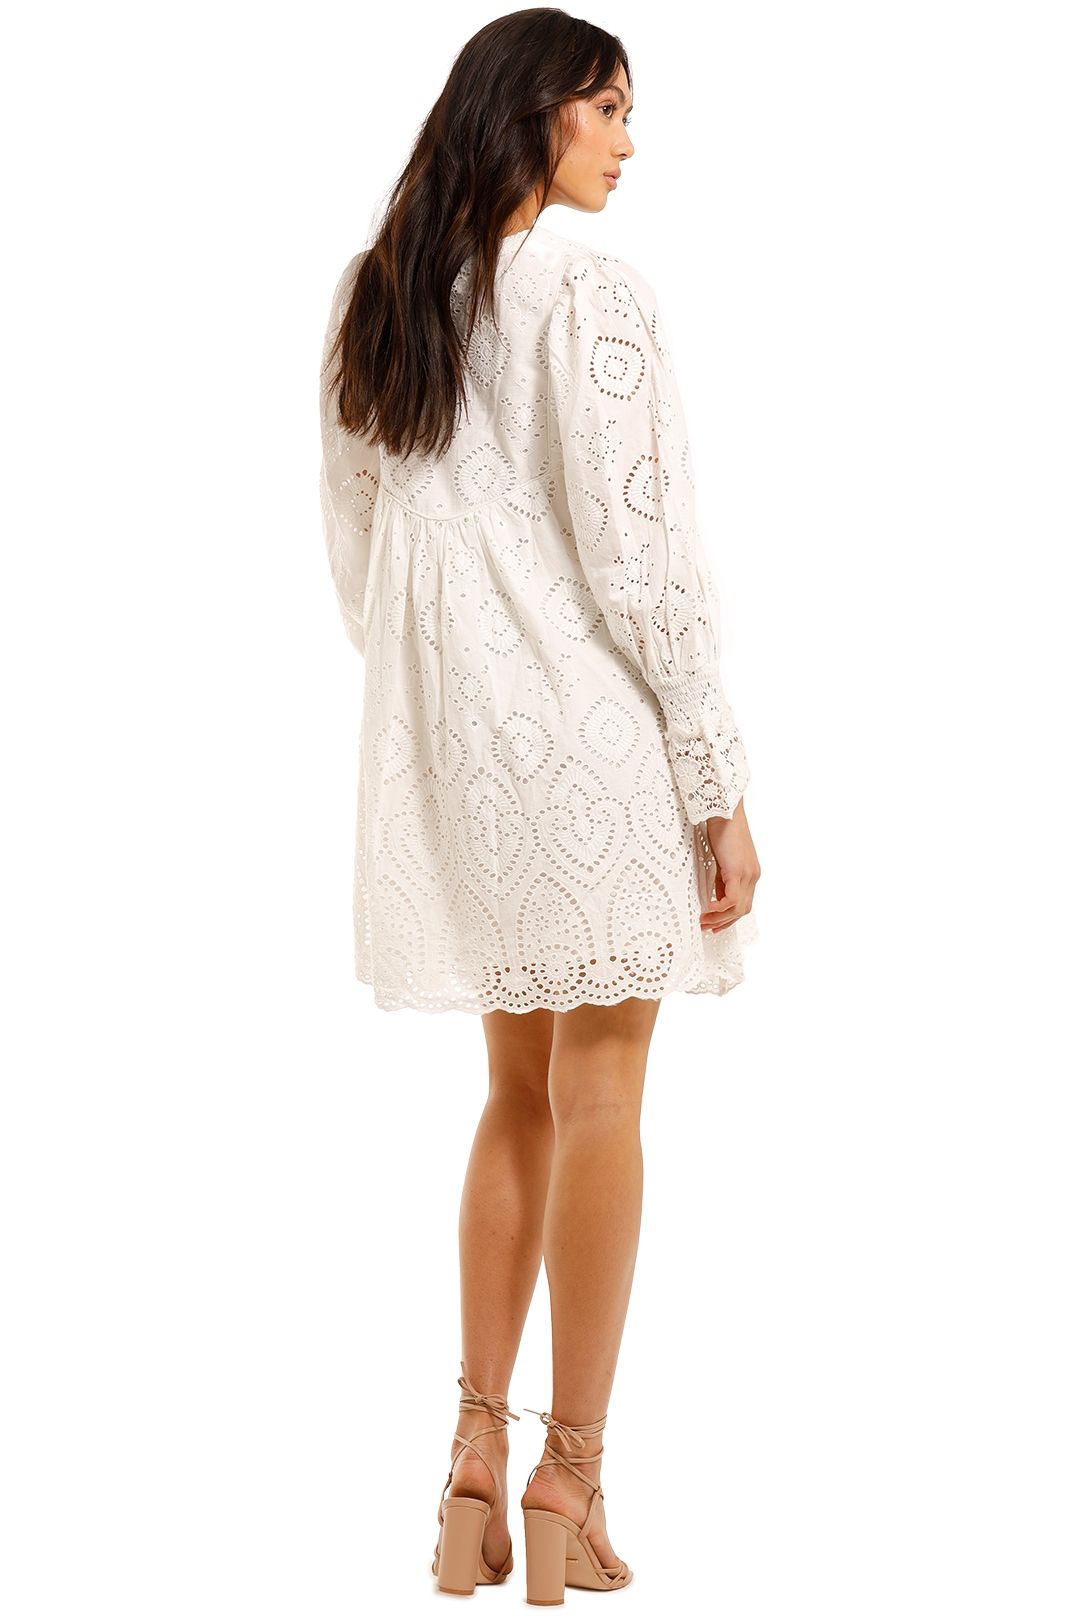 Spell Dylan Smock Dress White Lace